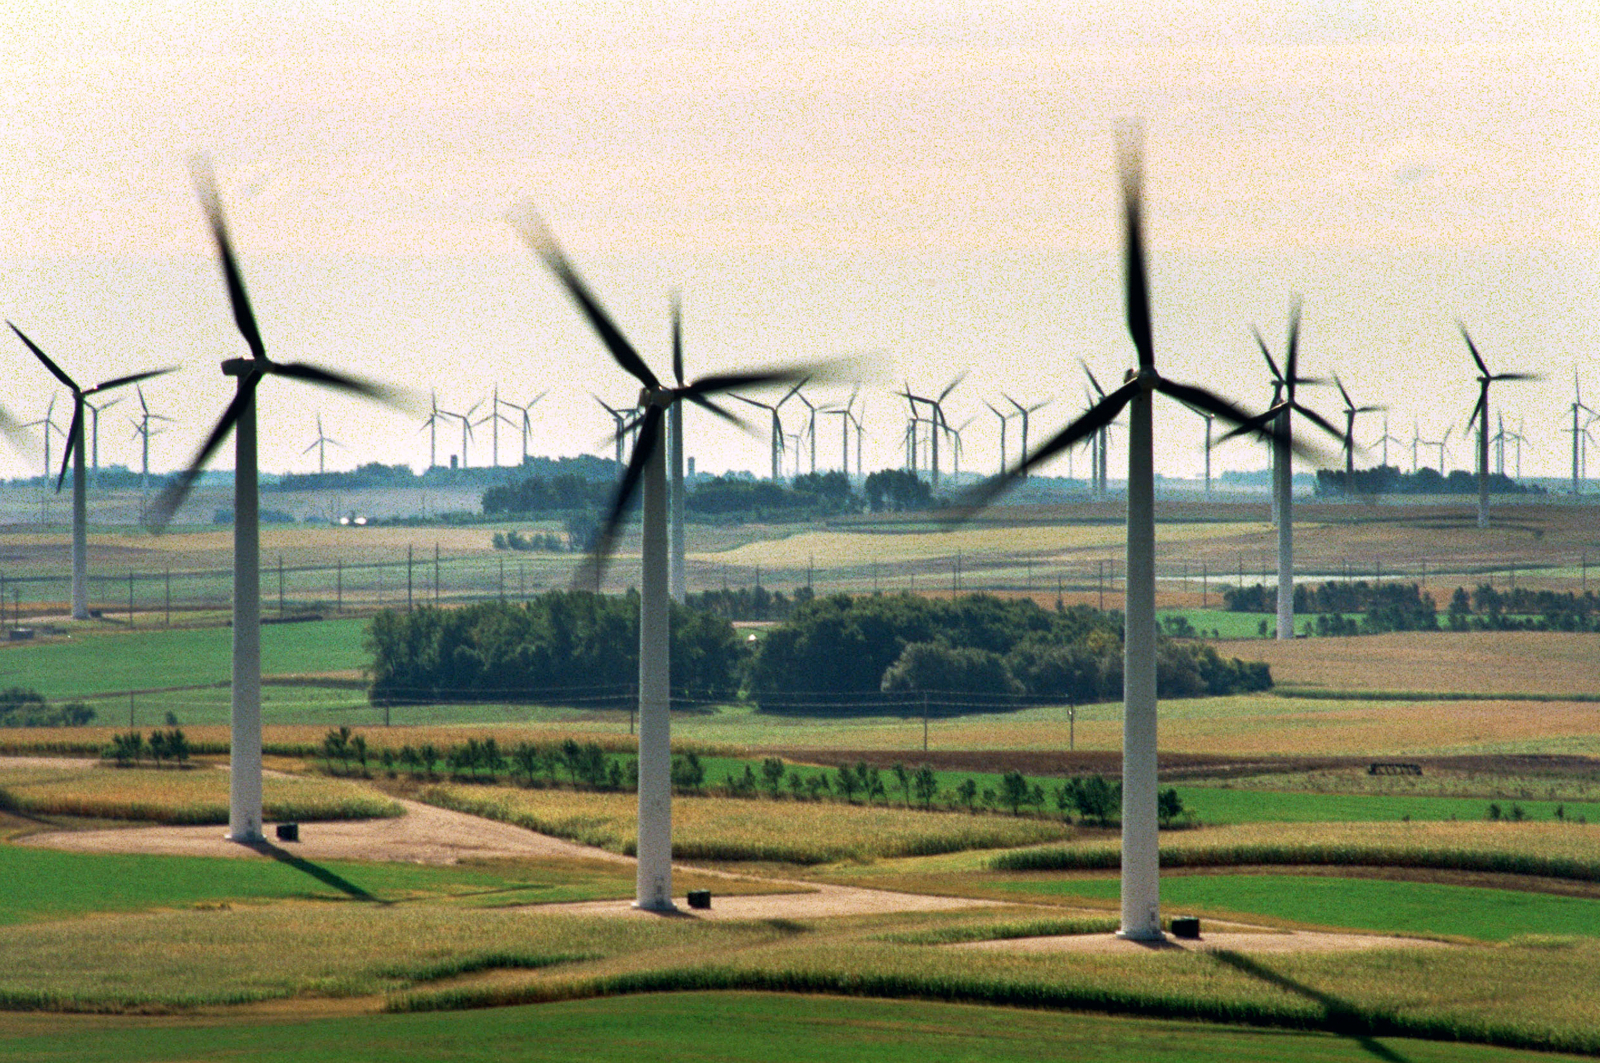 Rows of wind turbines are seen scattered across farmland